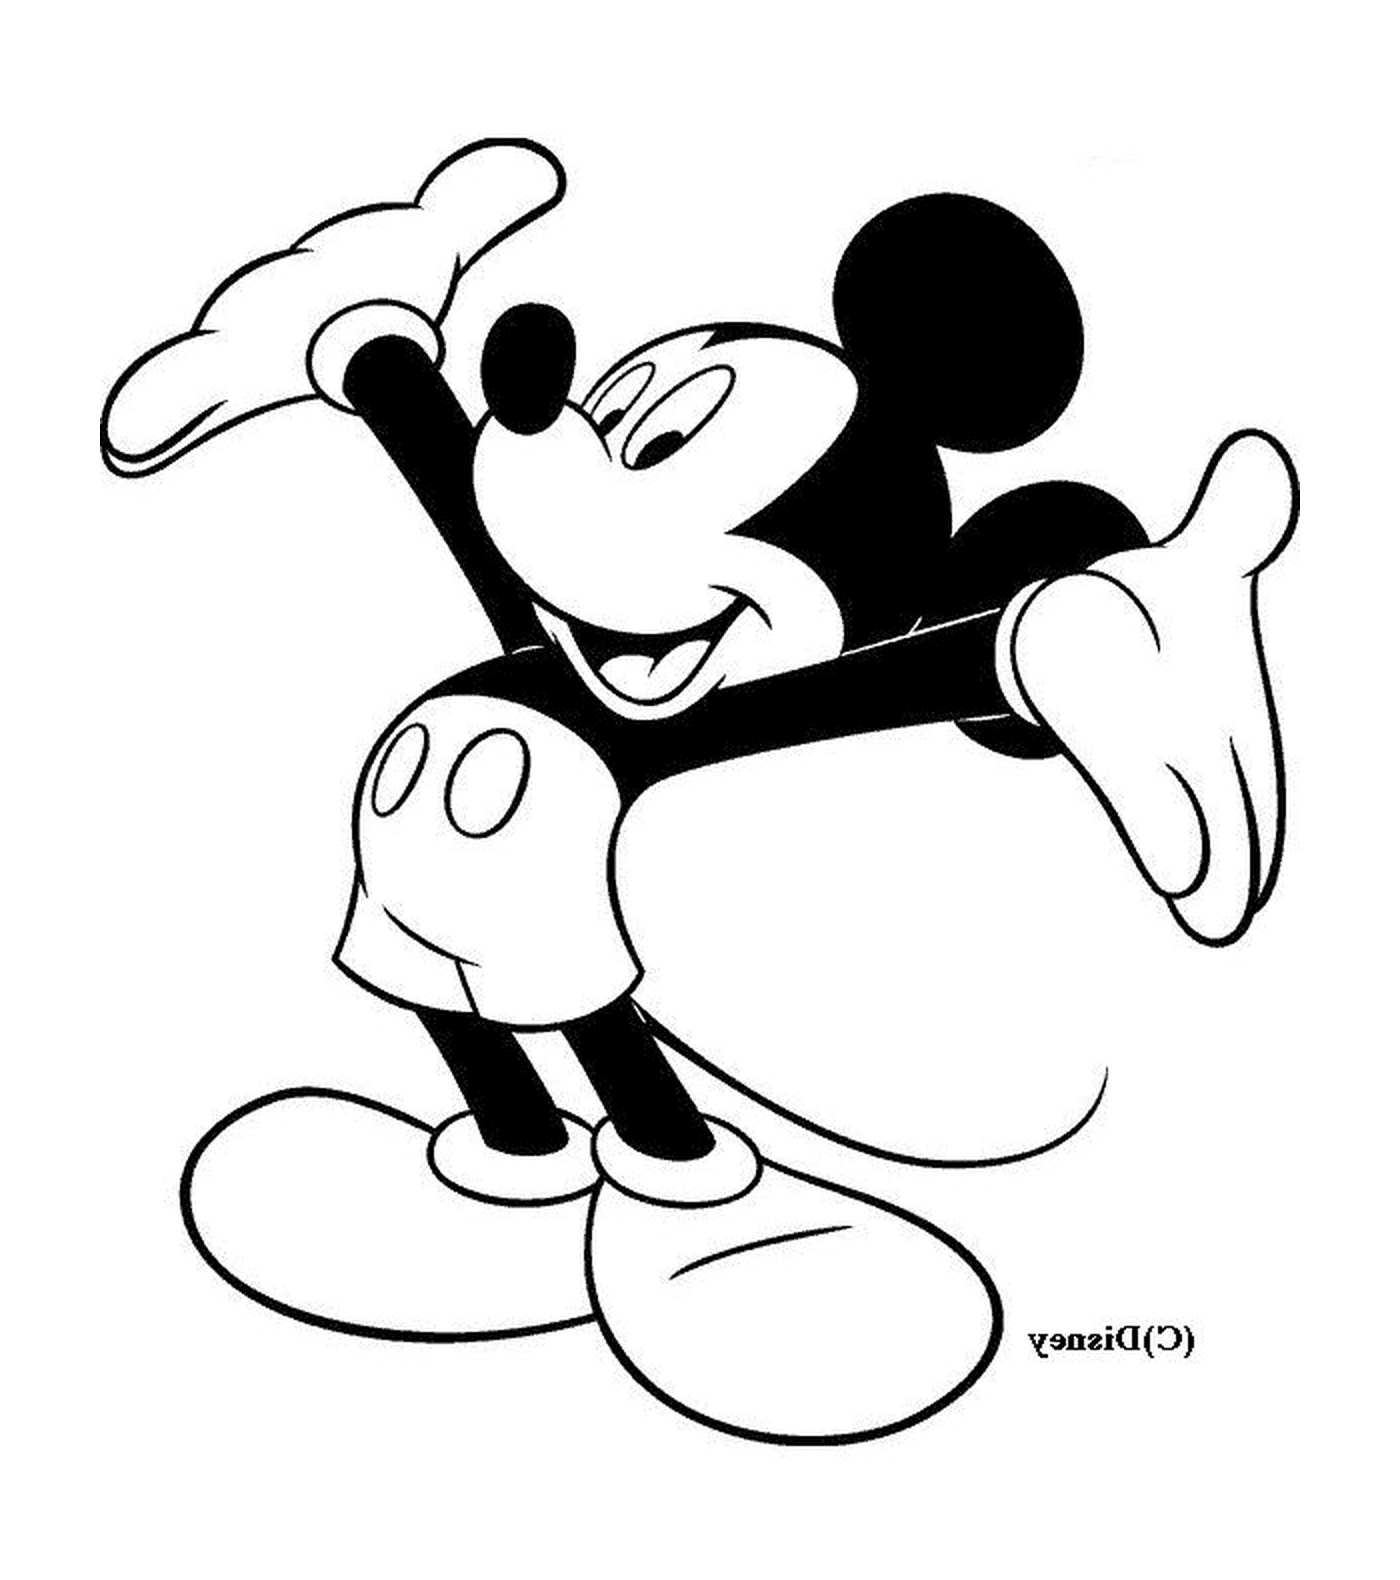  Mickey Mouse with his arms open 